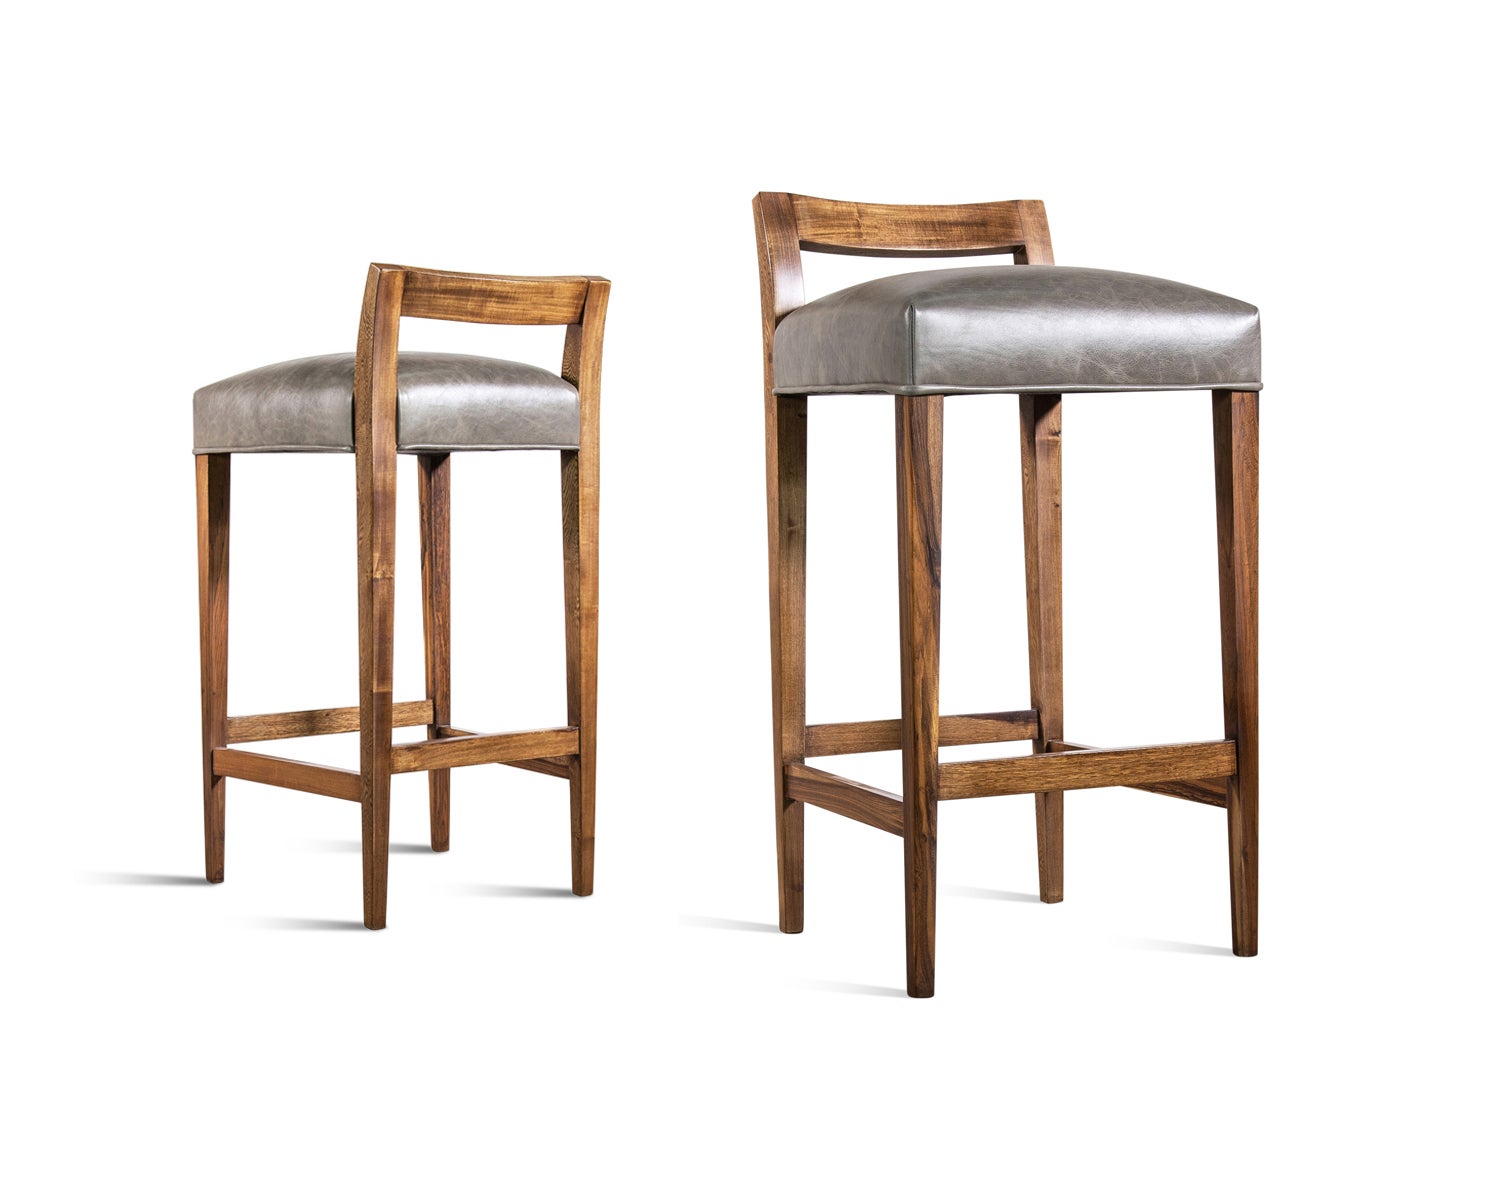 Exotic Wood Contemporary Low Back Stool in Leather from Costantini, Umberto